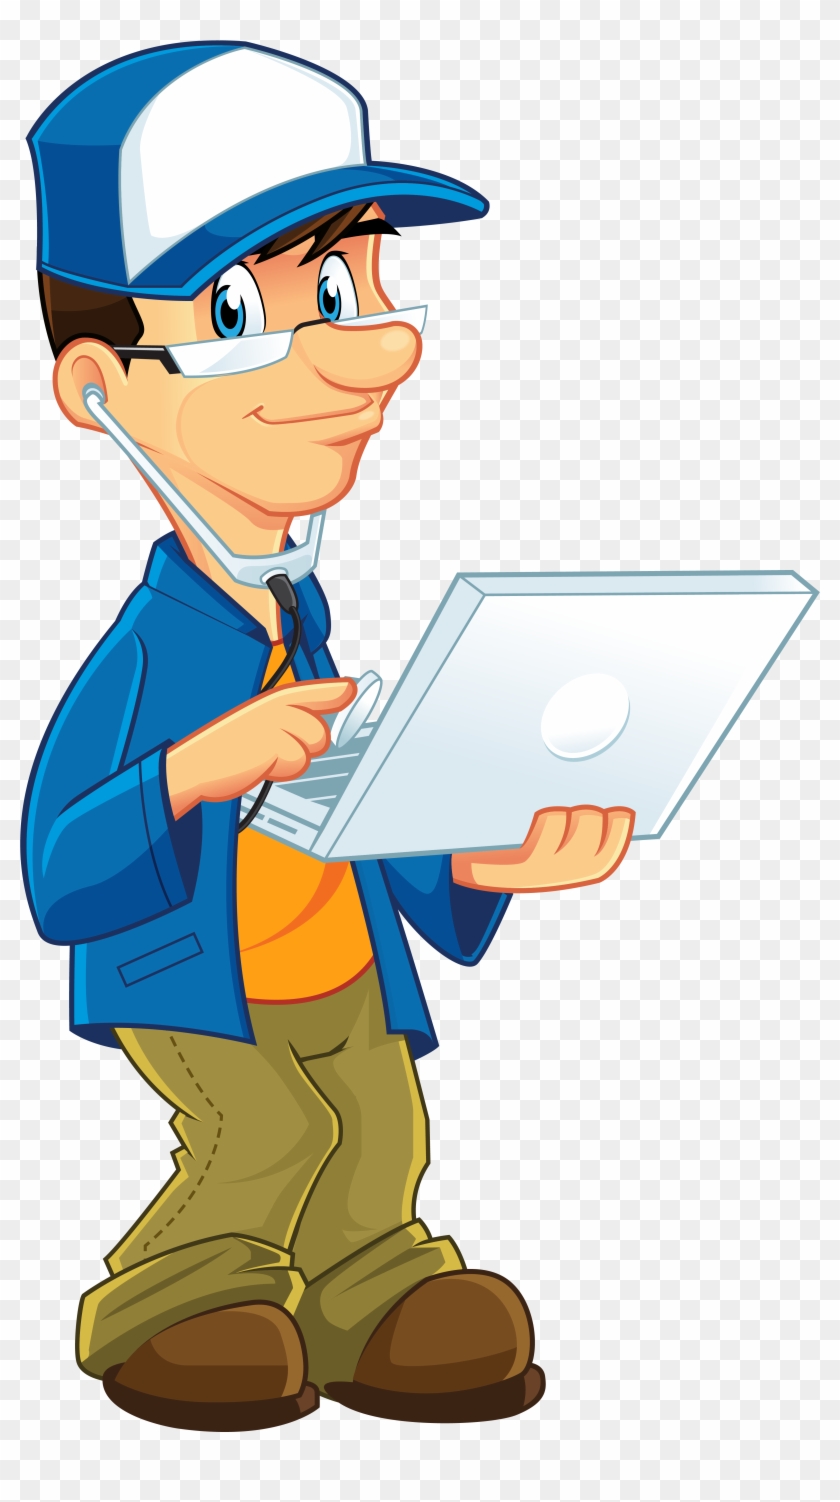 Computer Maintenance Personnel - Medical Cartoon Characters Png #685116